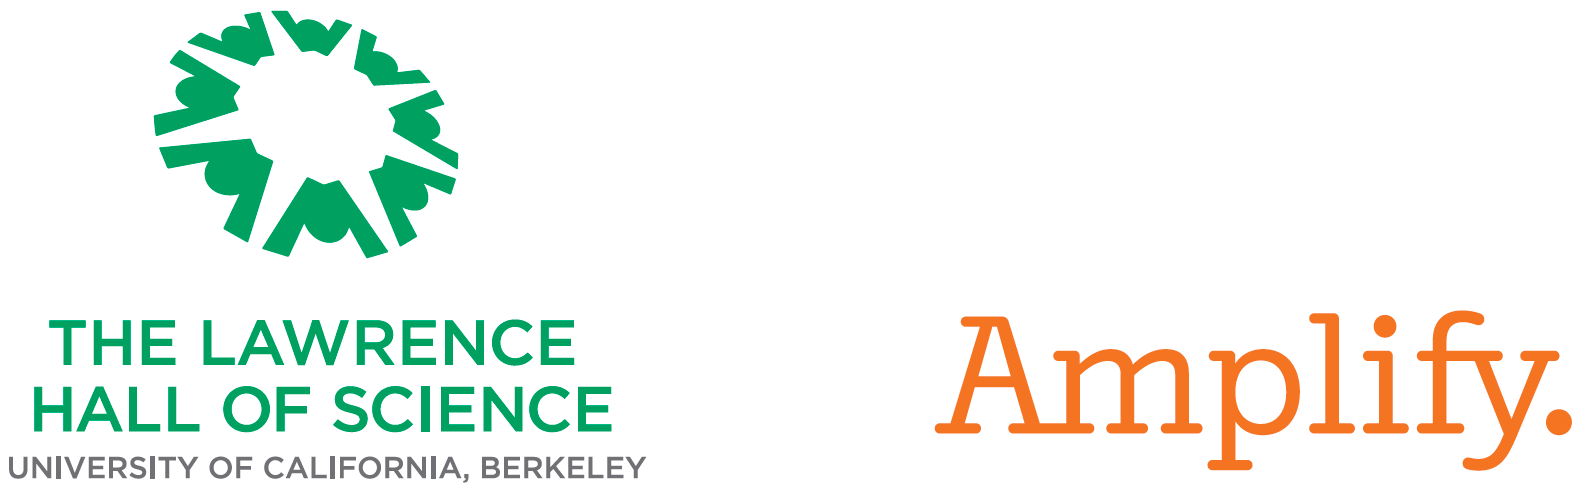 Logo for the lawrence hall of science at university of california, berkeley, featuring a green circular design next to the institution's name and the word 